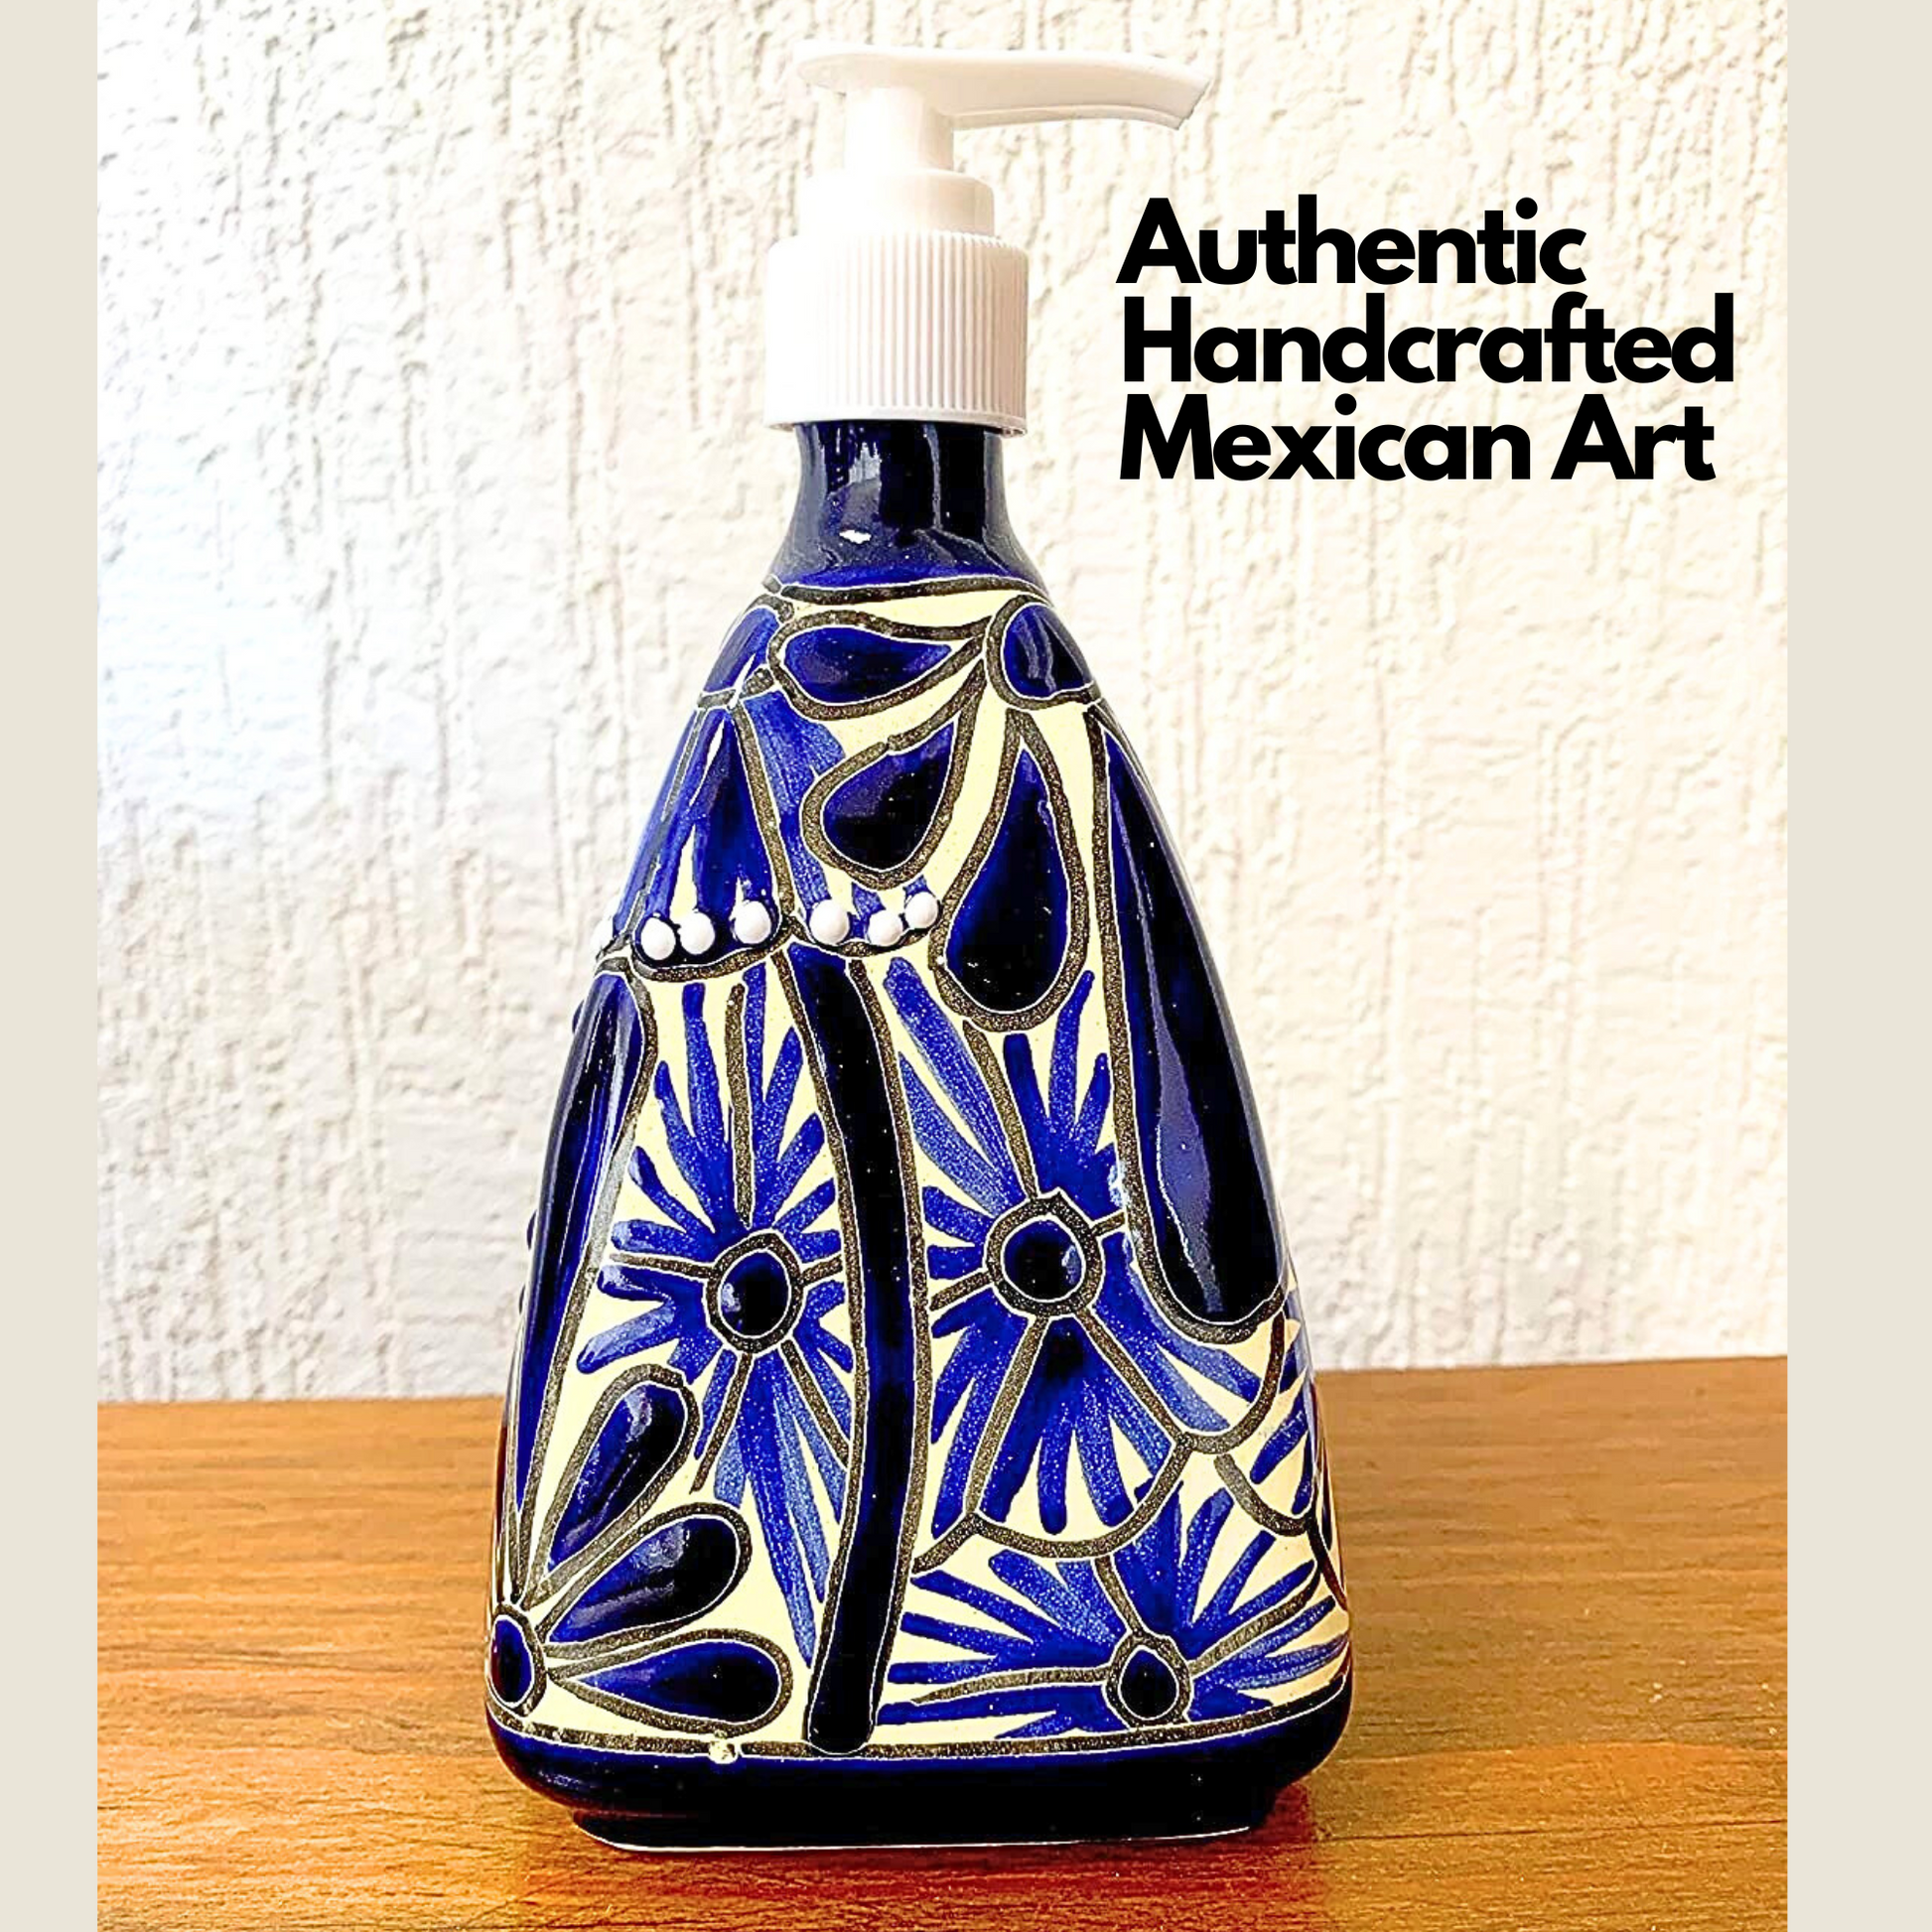 authentic handcrafted mexican art An eye-catching, hand-painted, Refillable Ceramic Soap Dispenser, skillfully crafted in Mexico. Perfect for adding a vibrant touch to any kitchen or bathroom.